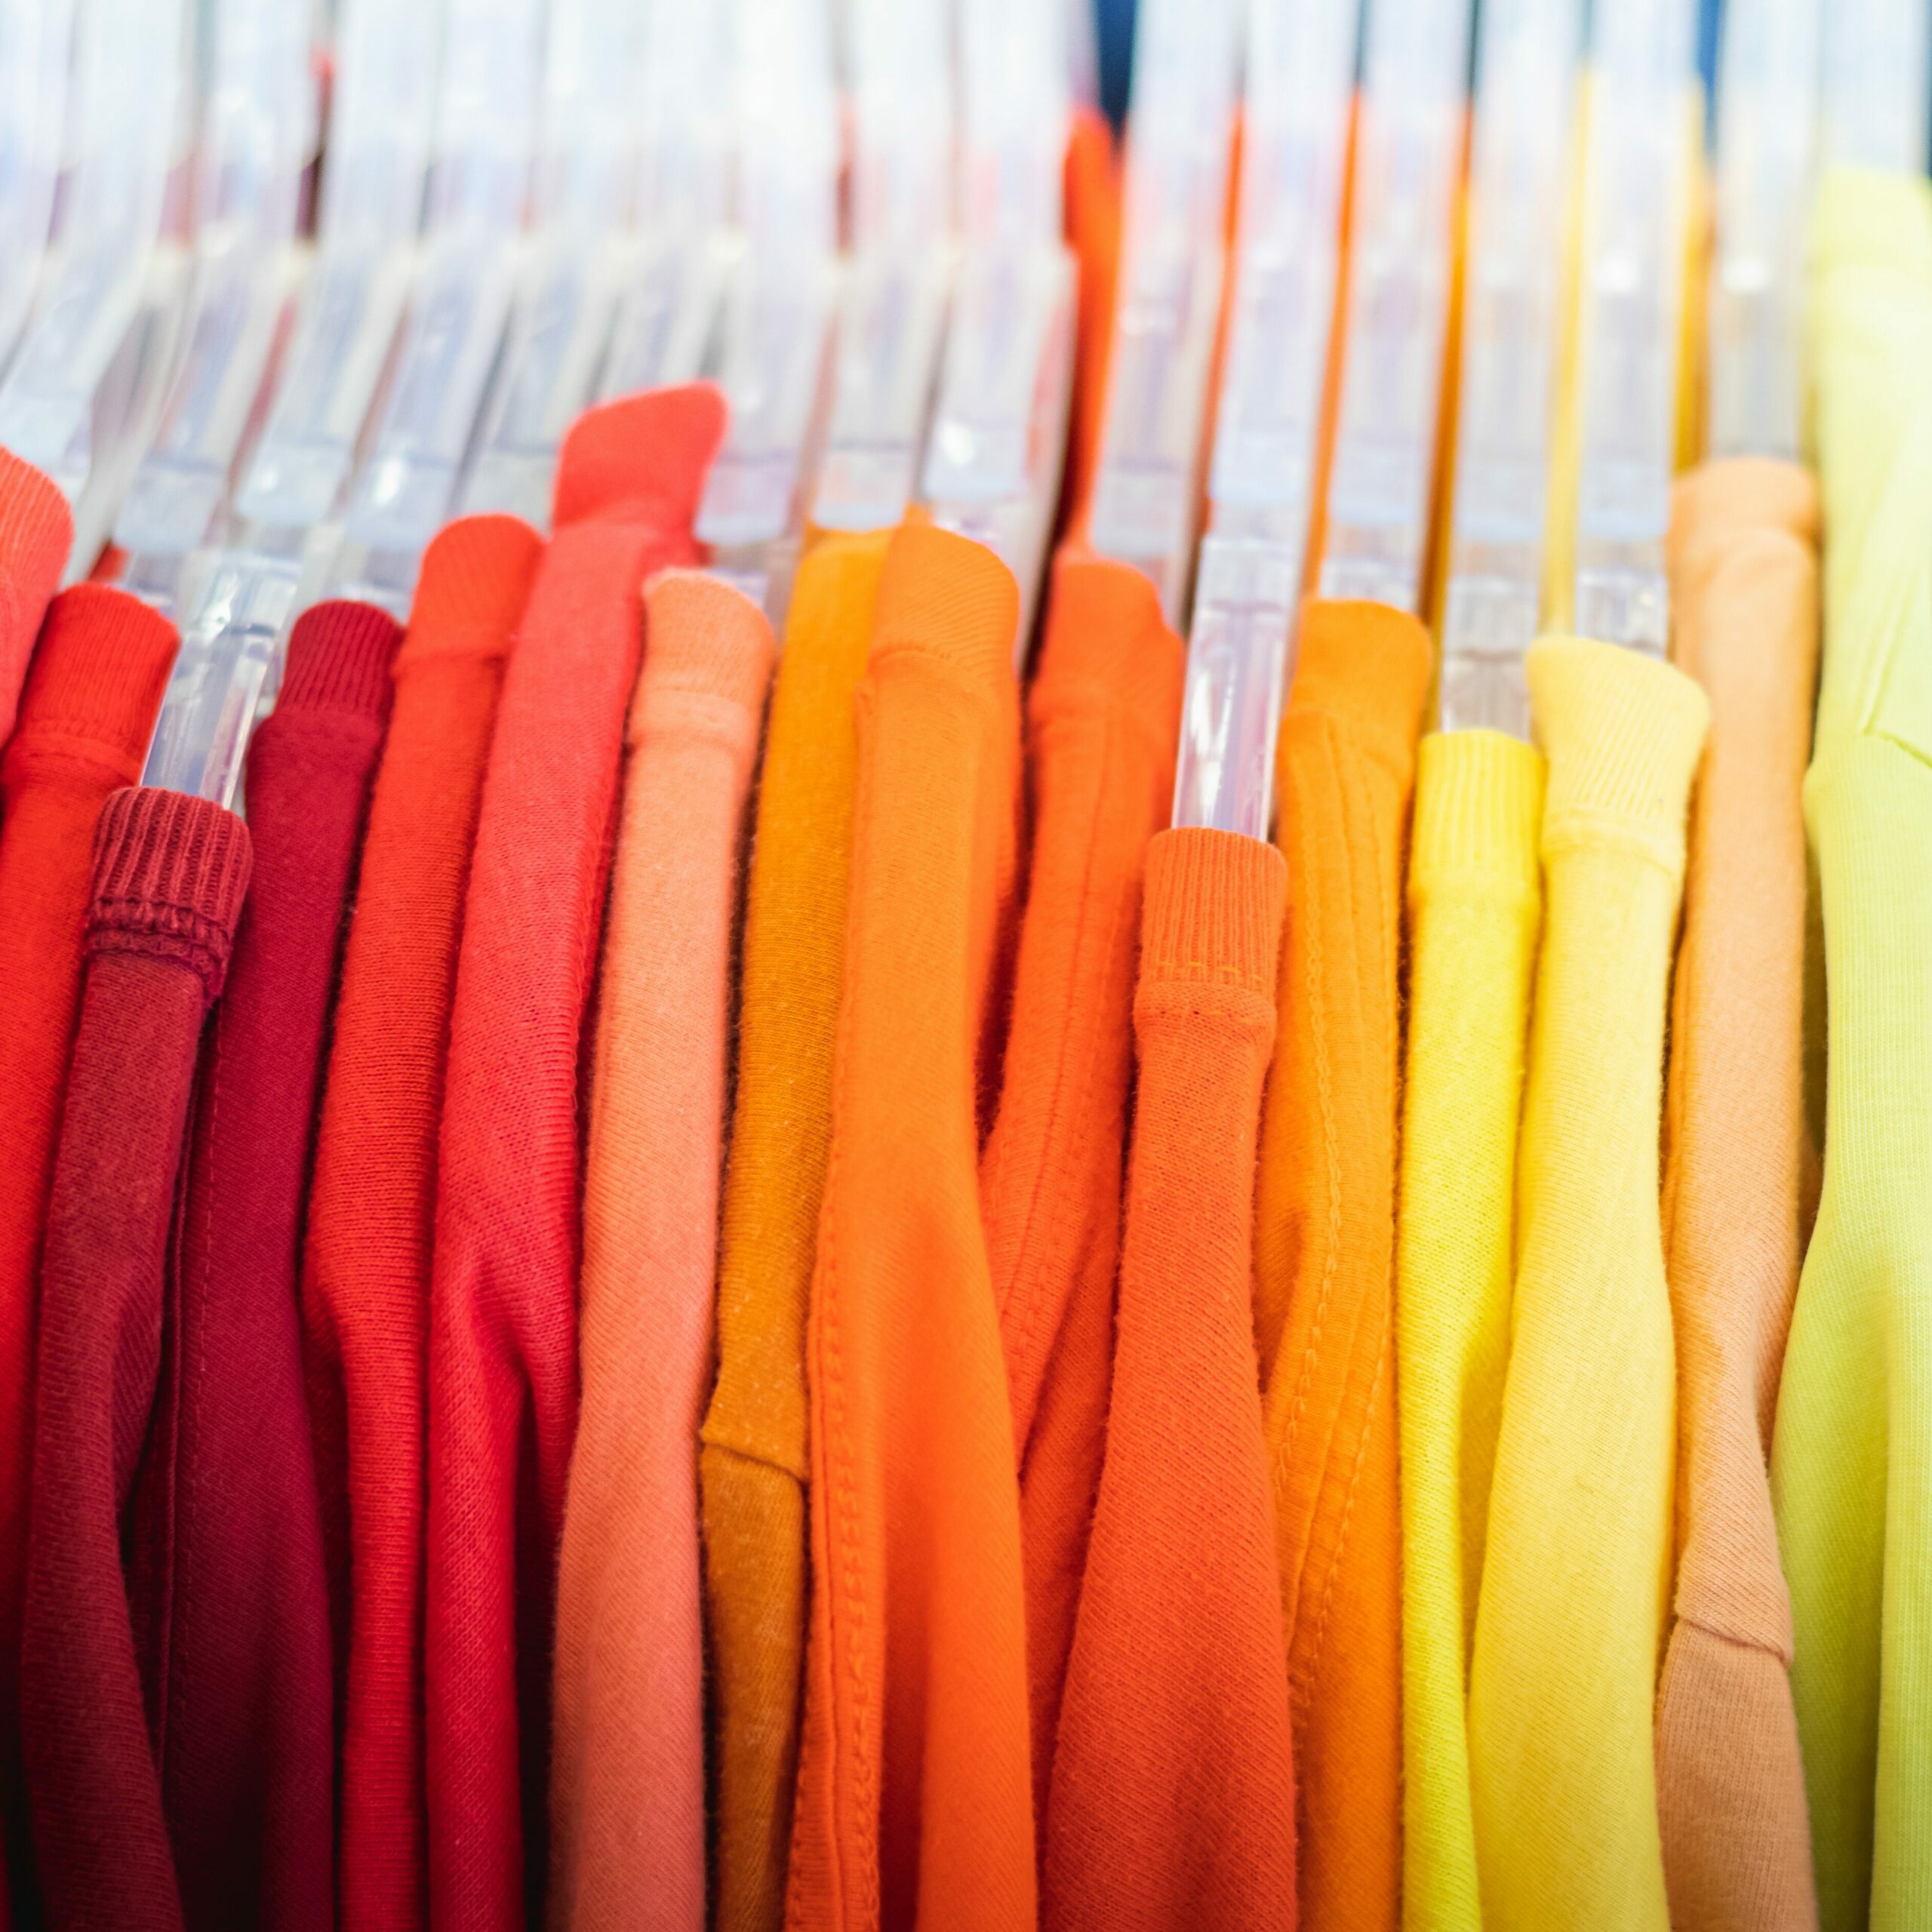 Brightly coloured clothes hanging on a rack in order of red on the left, orange in the middle, and yellow on the right